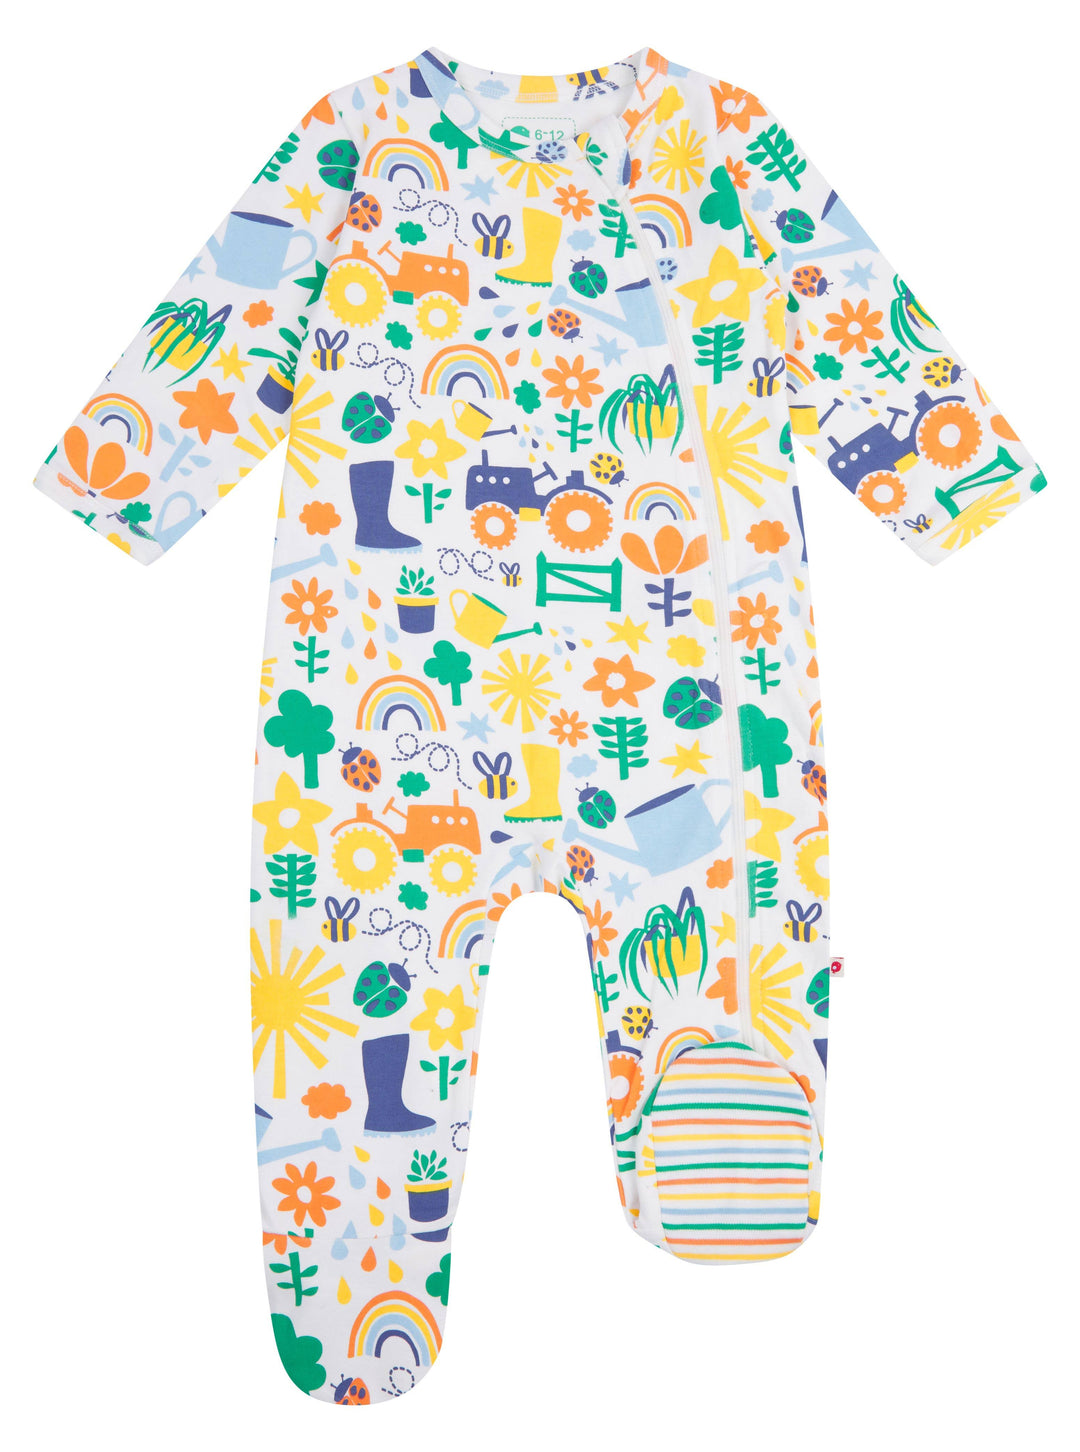 Potting Shed - Zip Up Footed Sleepsuit